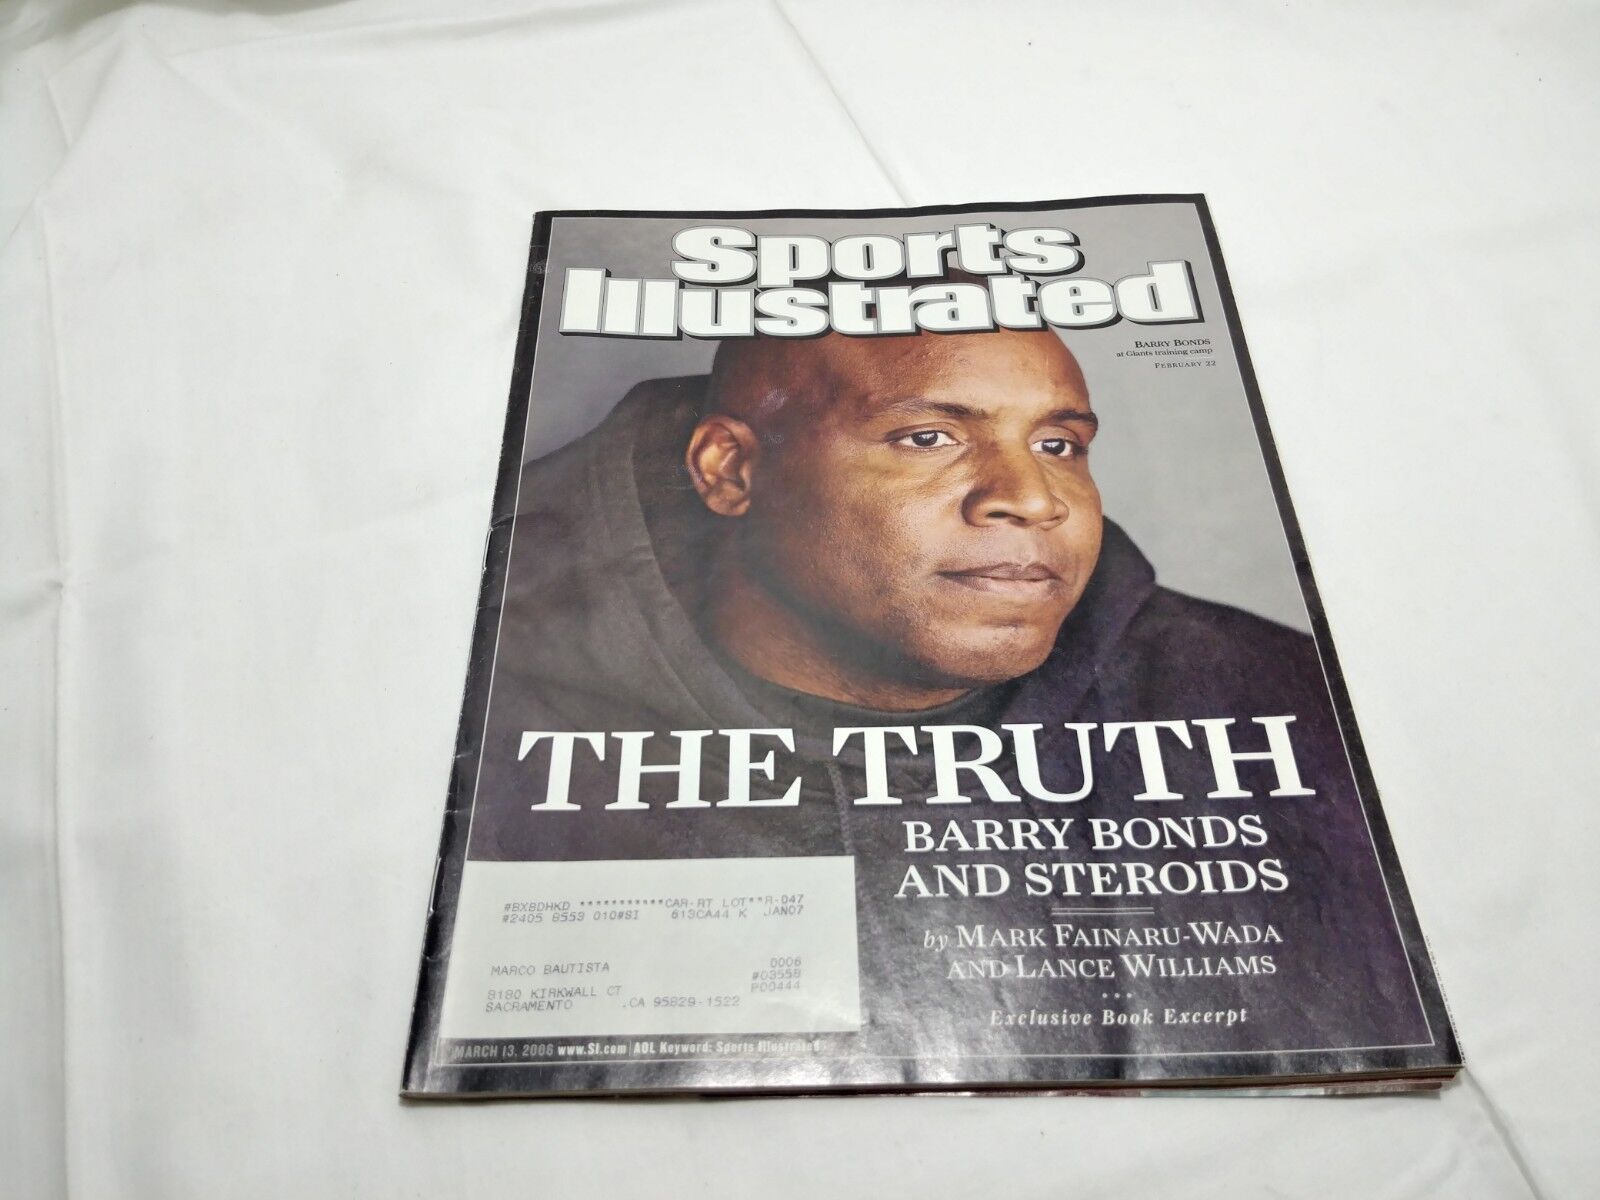 Sports Illustrated Match 13 2006 Barry Bonds and Steroids